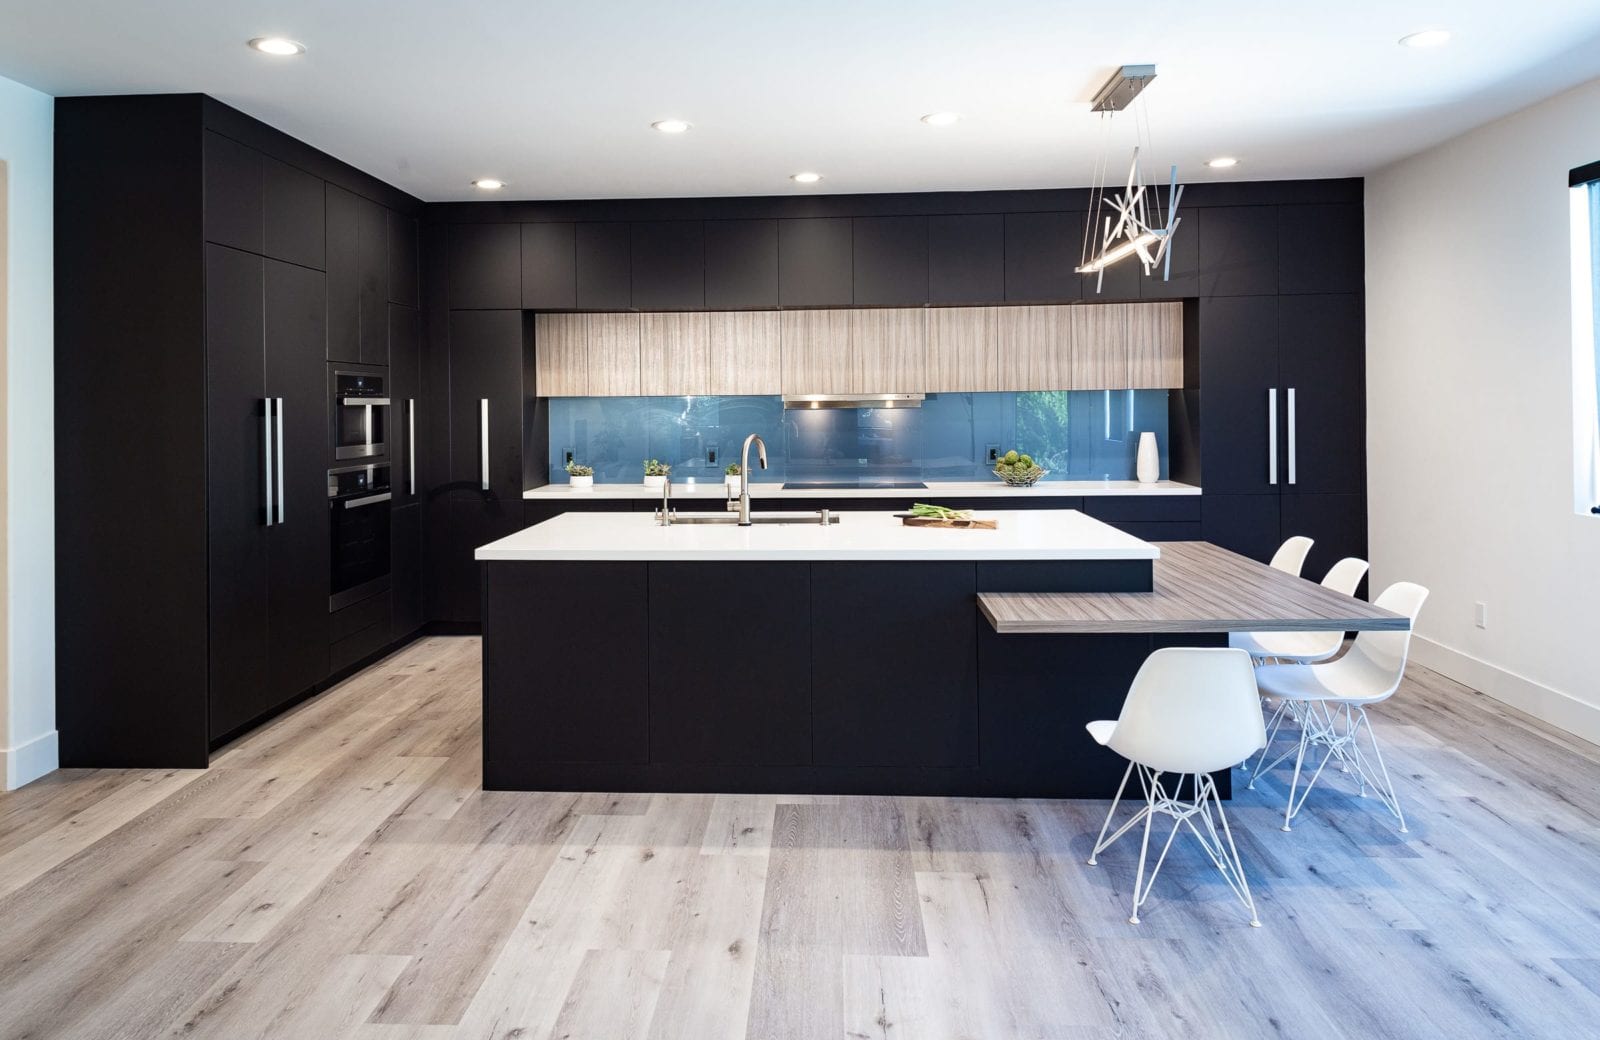 Black Cabinets with Touch Latch Hardware - Kitchen Remodel san ramon